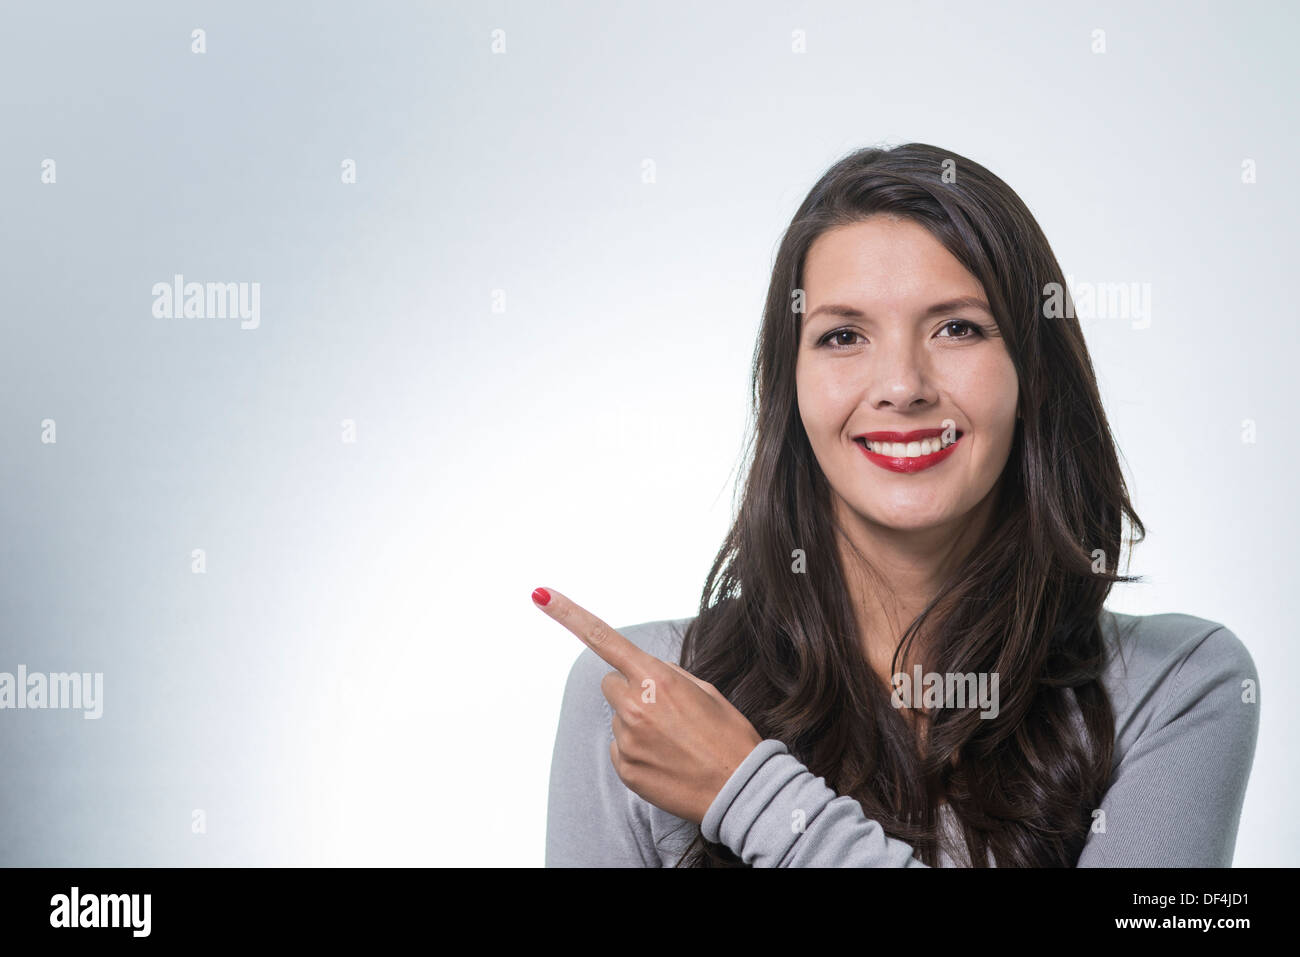 Beautiful young woman with a lovely friendly smile standing with an index finger pointing to copy space for your ad Stock Photo